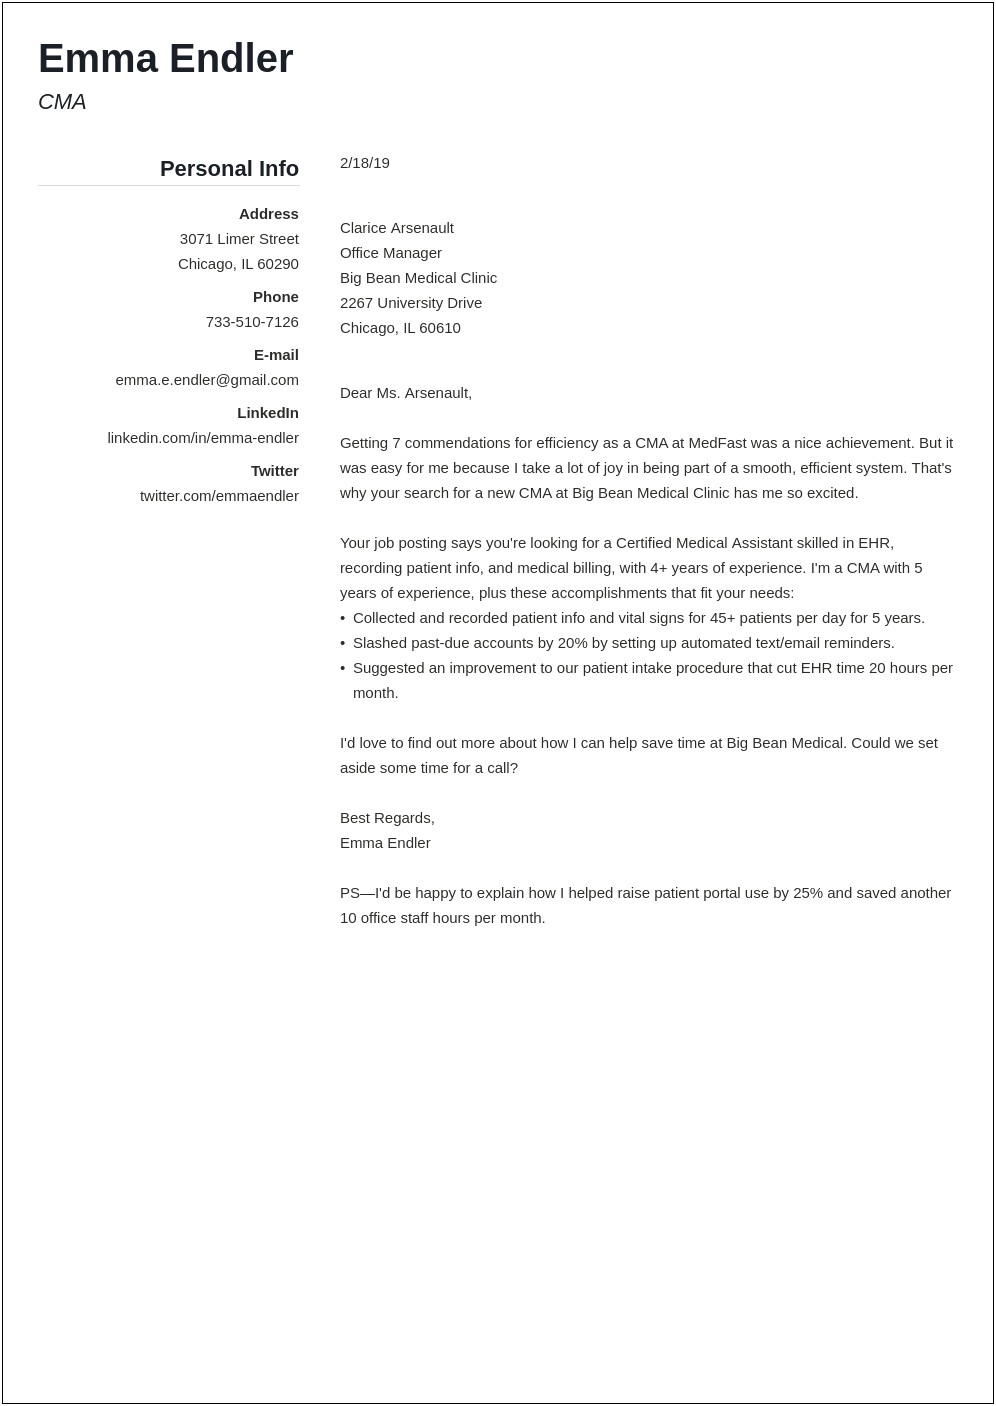 Resume Cover Short Cover Letter Examples